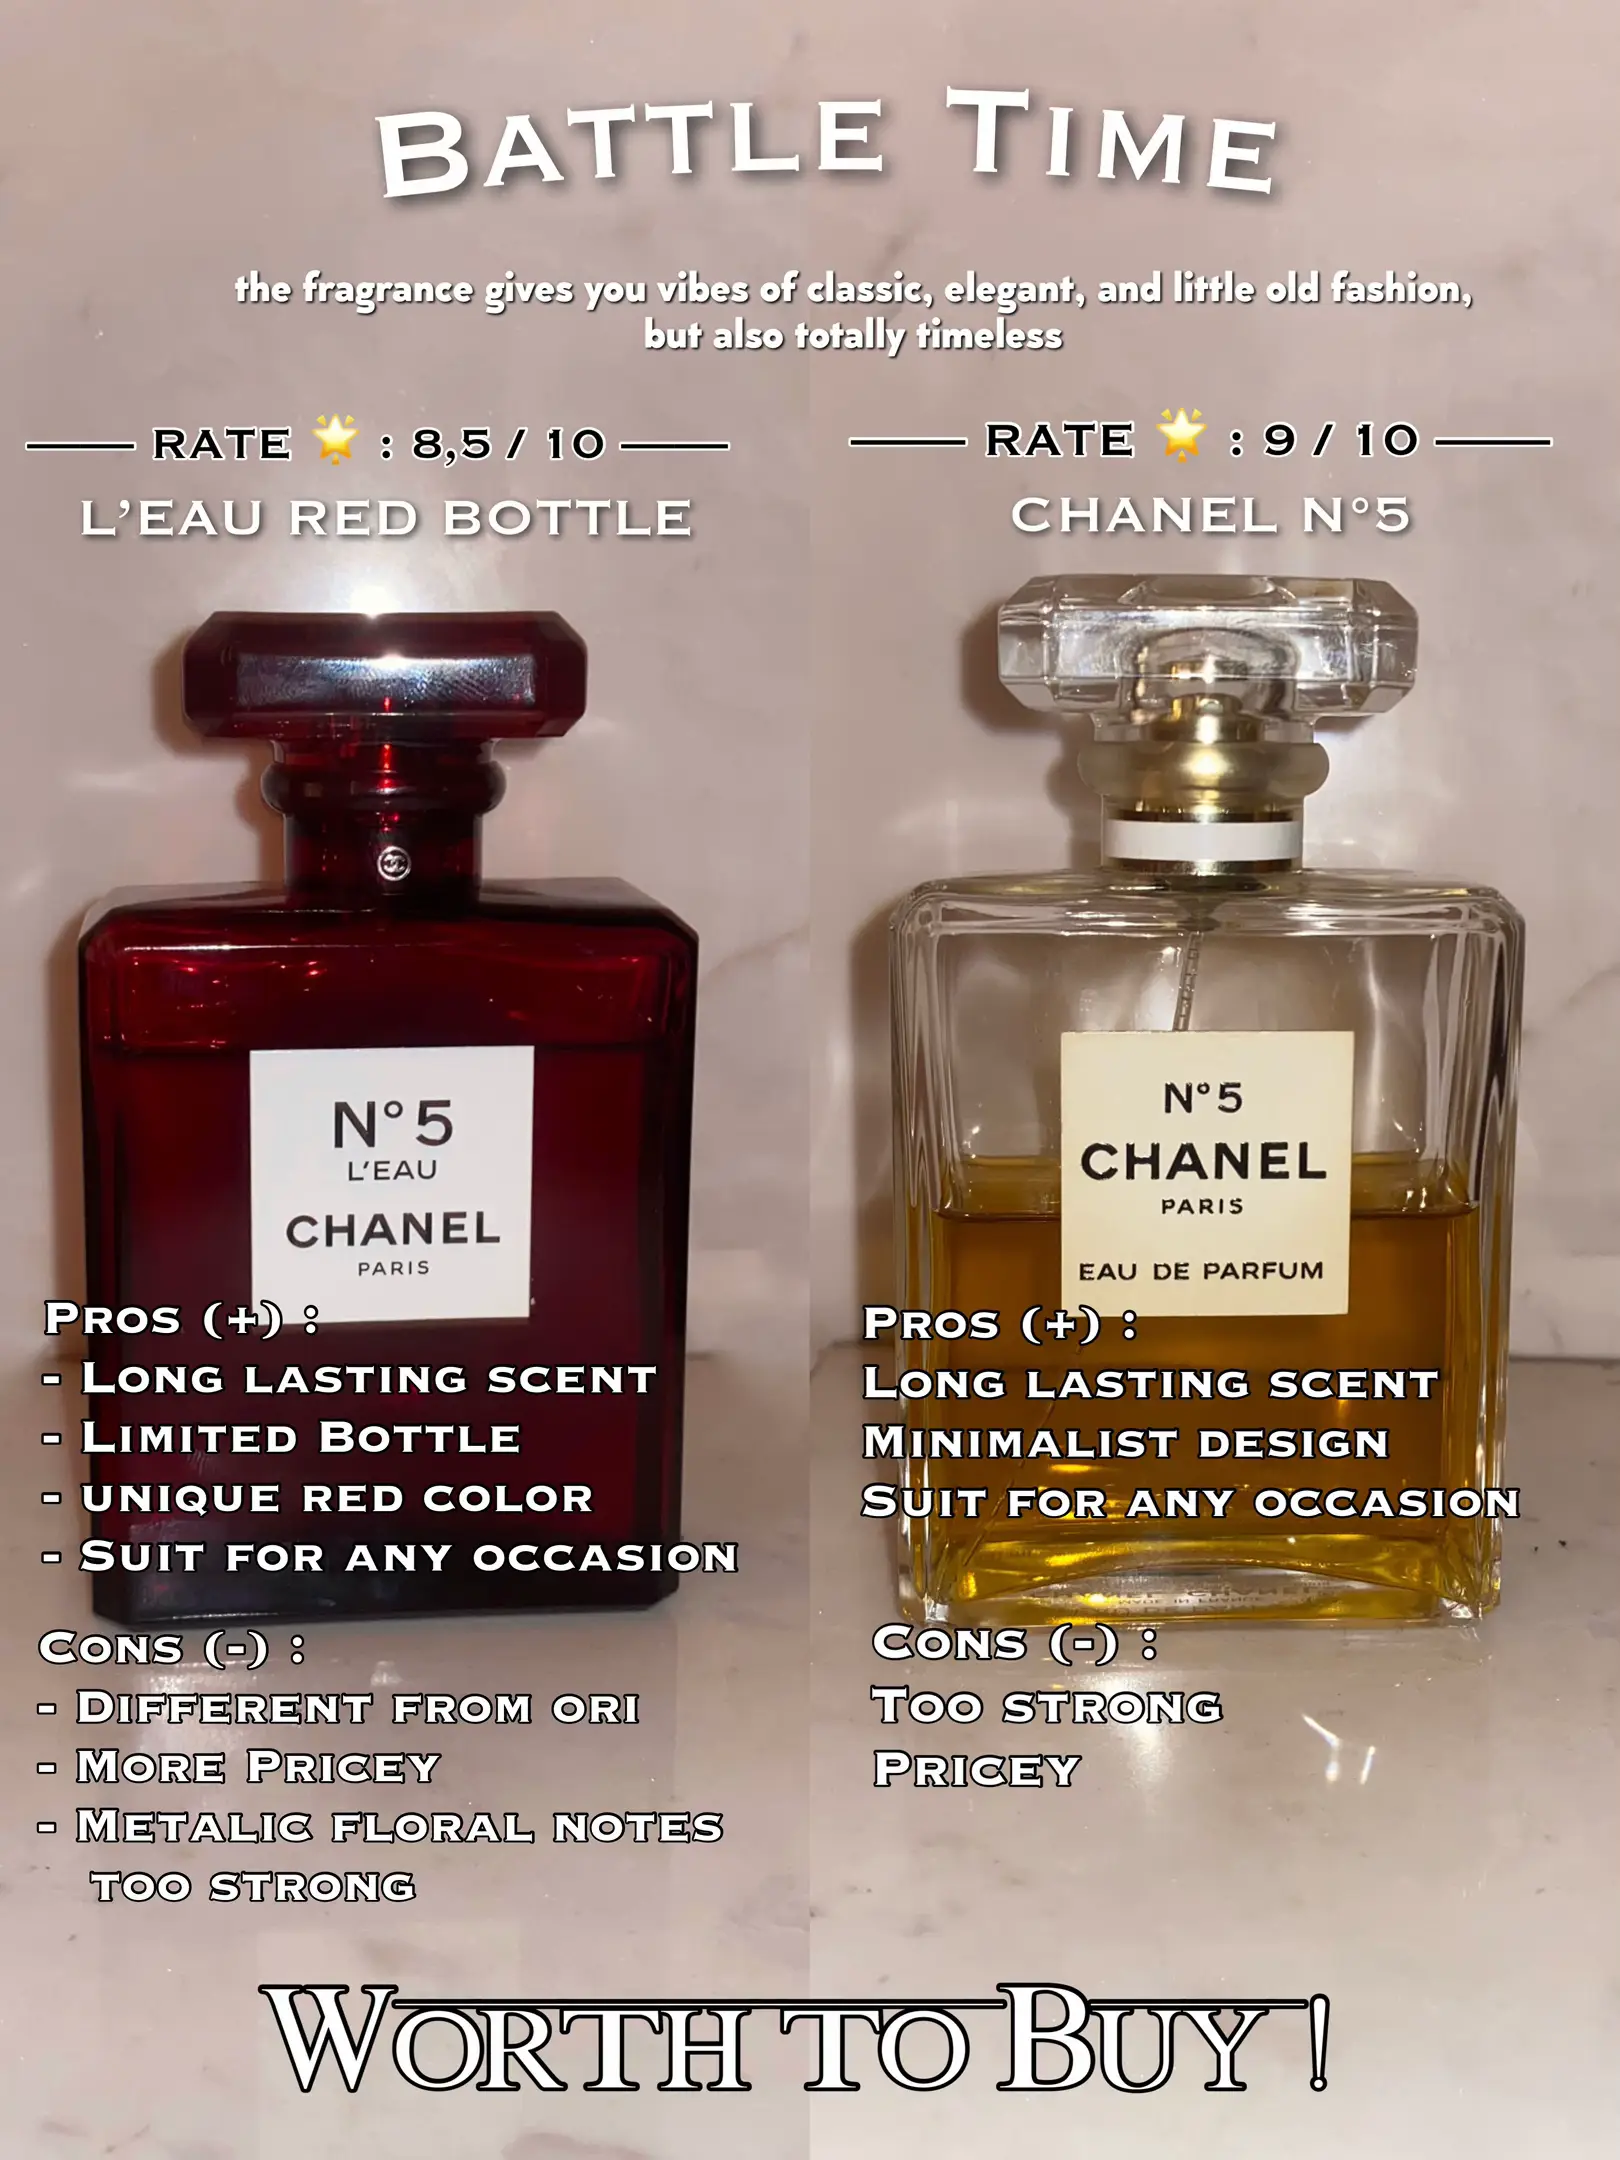 BATTLE ICONIC CHANEL PERFUME 👀🙀🥀, Gallery posted by Valen Cecilia🌷